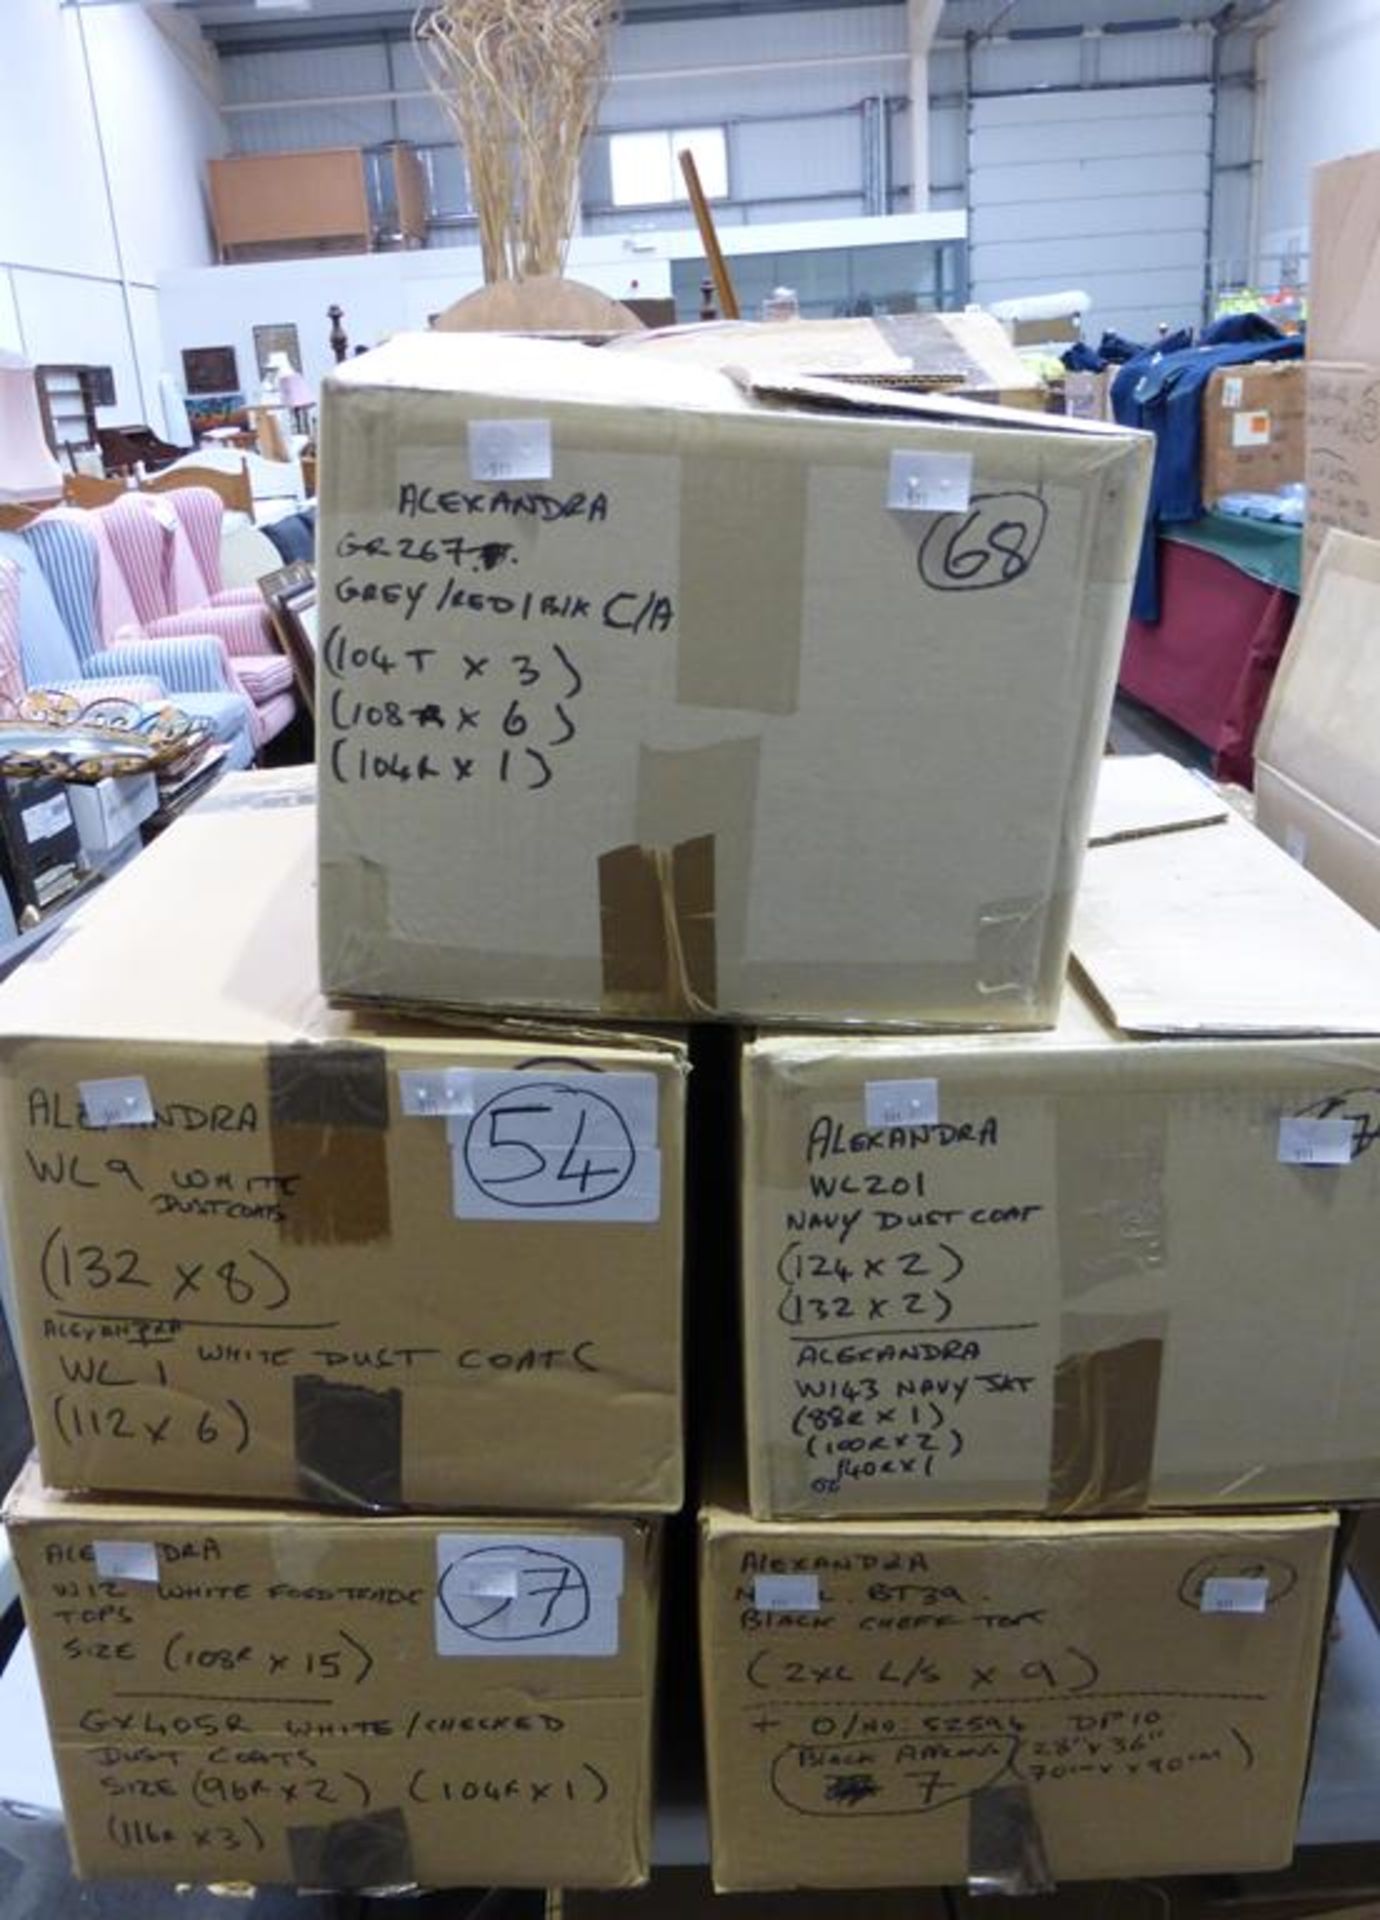 * 8 X boxes of various Workwear to include Aprons, Checked Coats etc